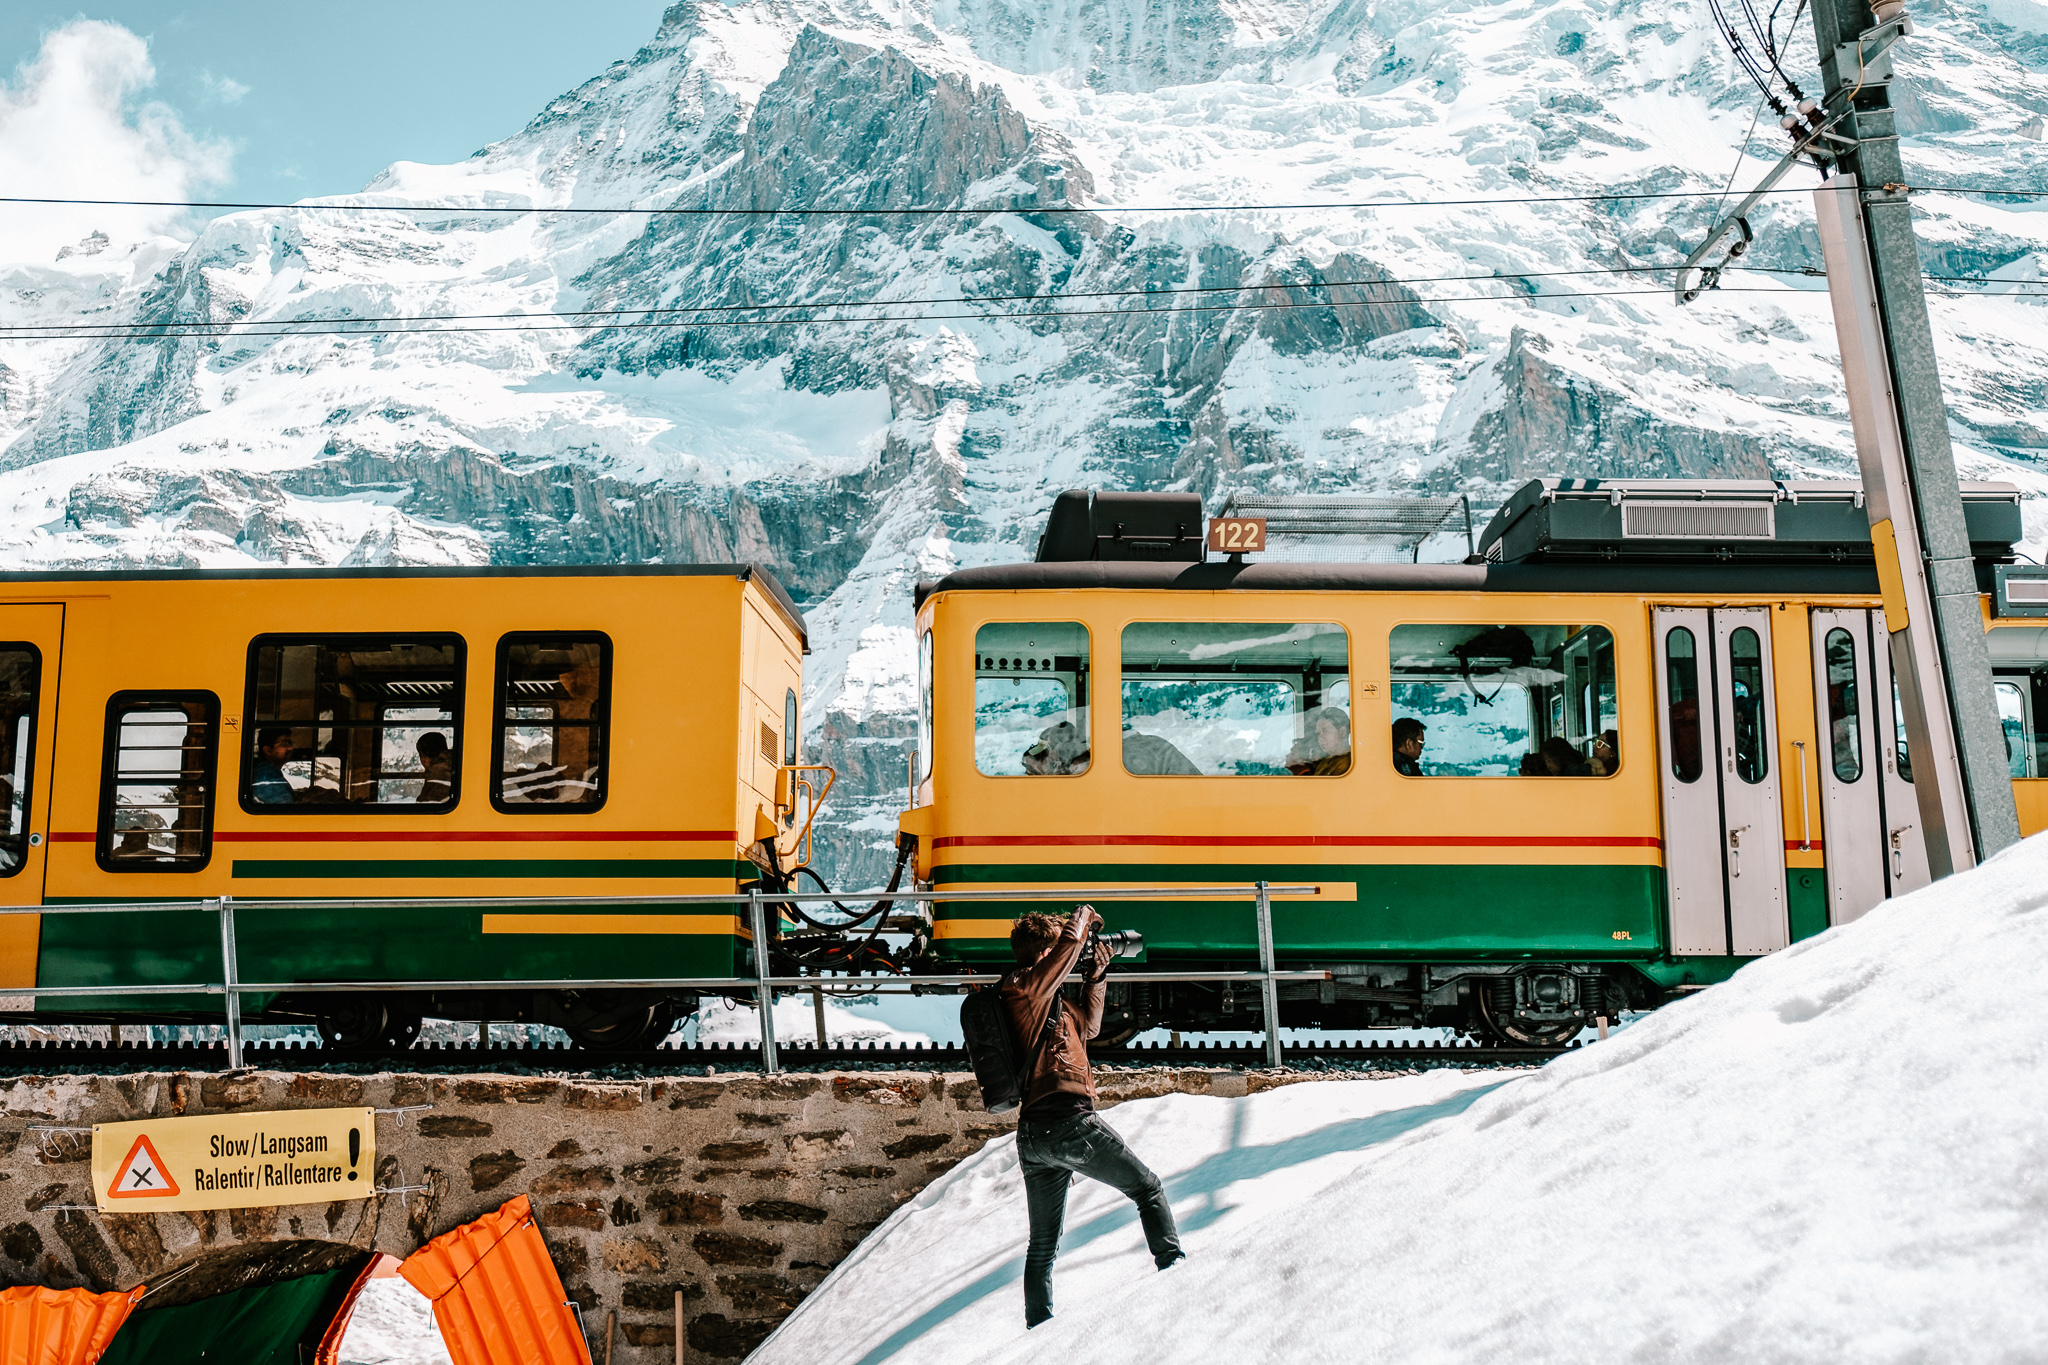 A yellow and green train running in front of a snowy mountain in the Swiss Alps, with a photographer taking a photo in front.